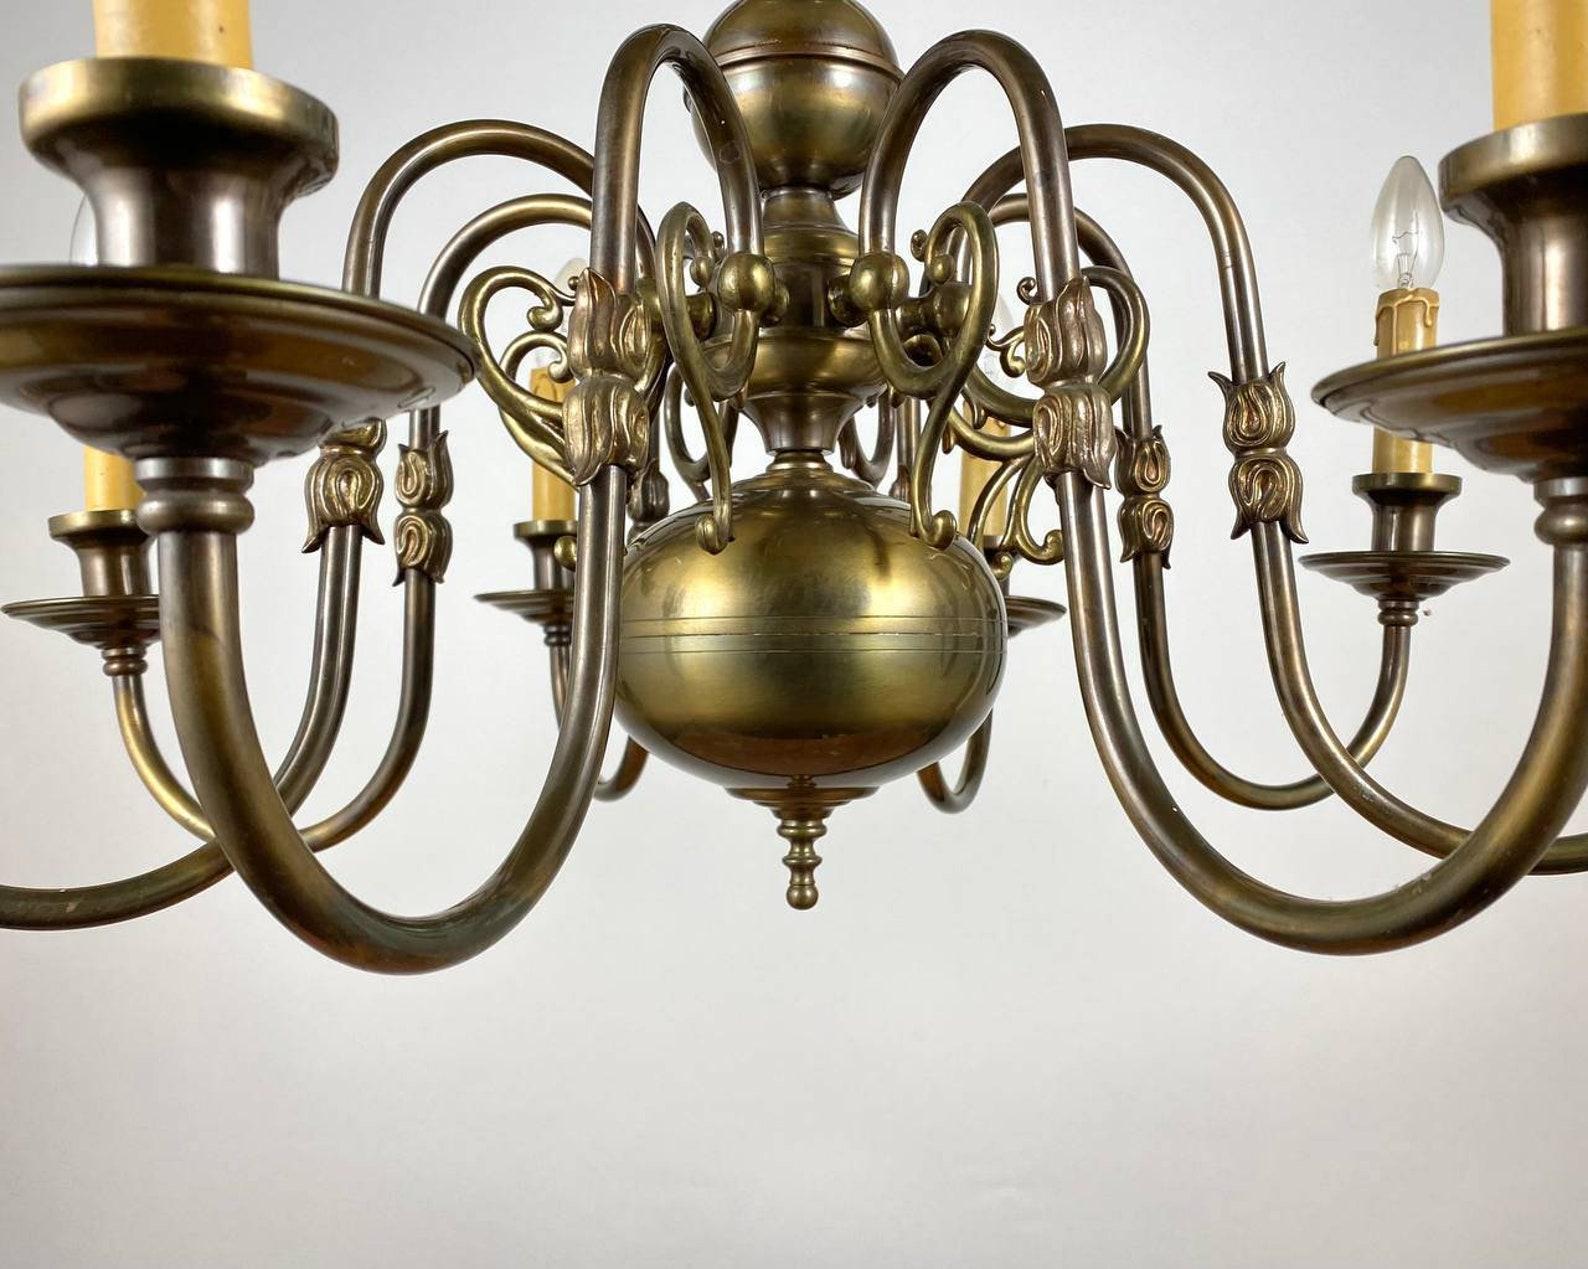 20th Century Vintage Chandelier With Double-Headed Eagle Flemish-Style Brass Lighting